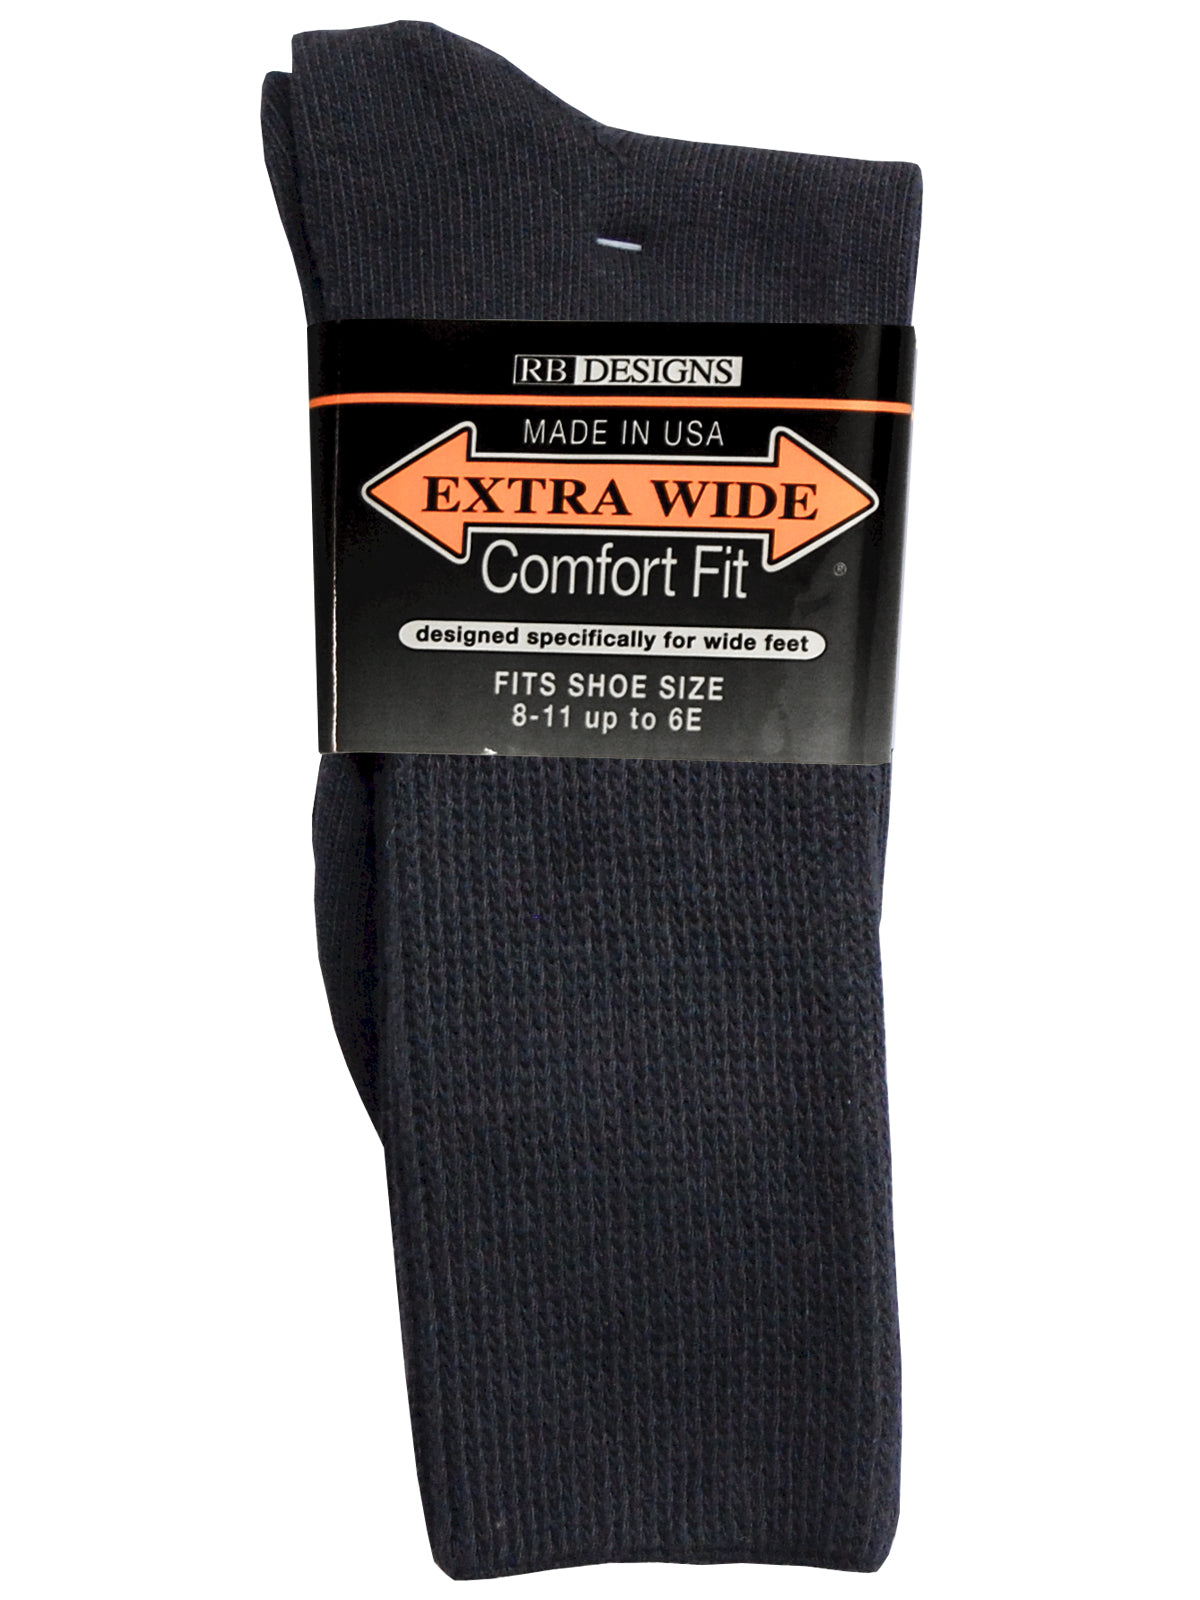 Extra Wide Men's Comfort Fit Athletic Crew Socks in Black - Size Large (12 - 16)